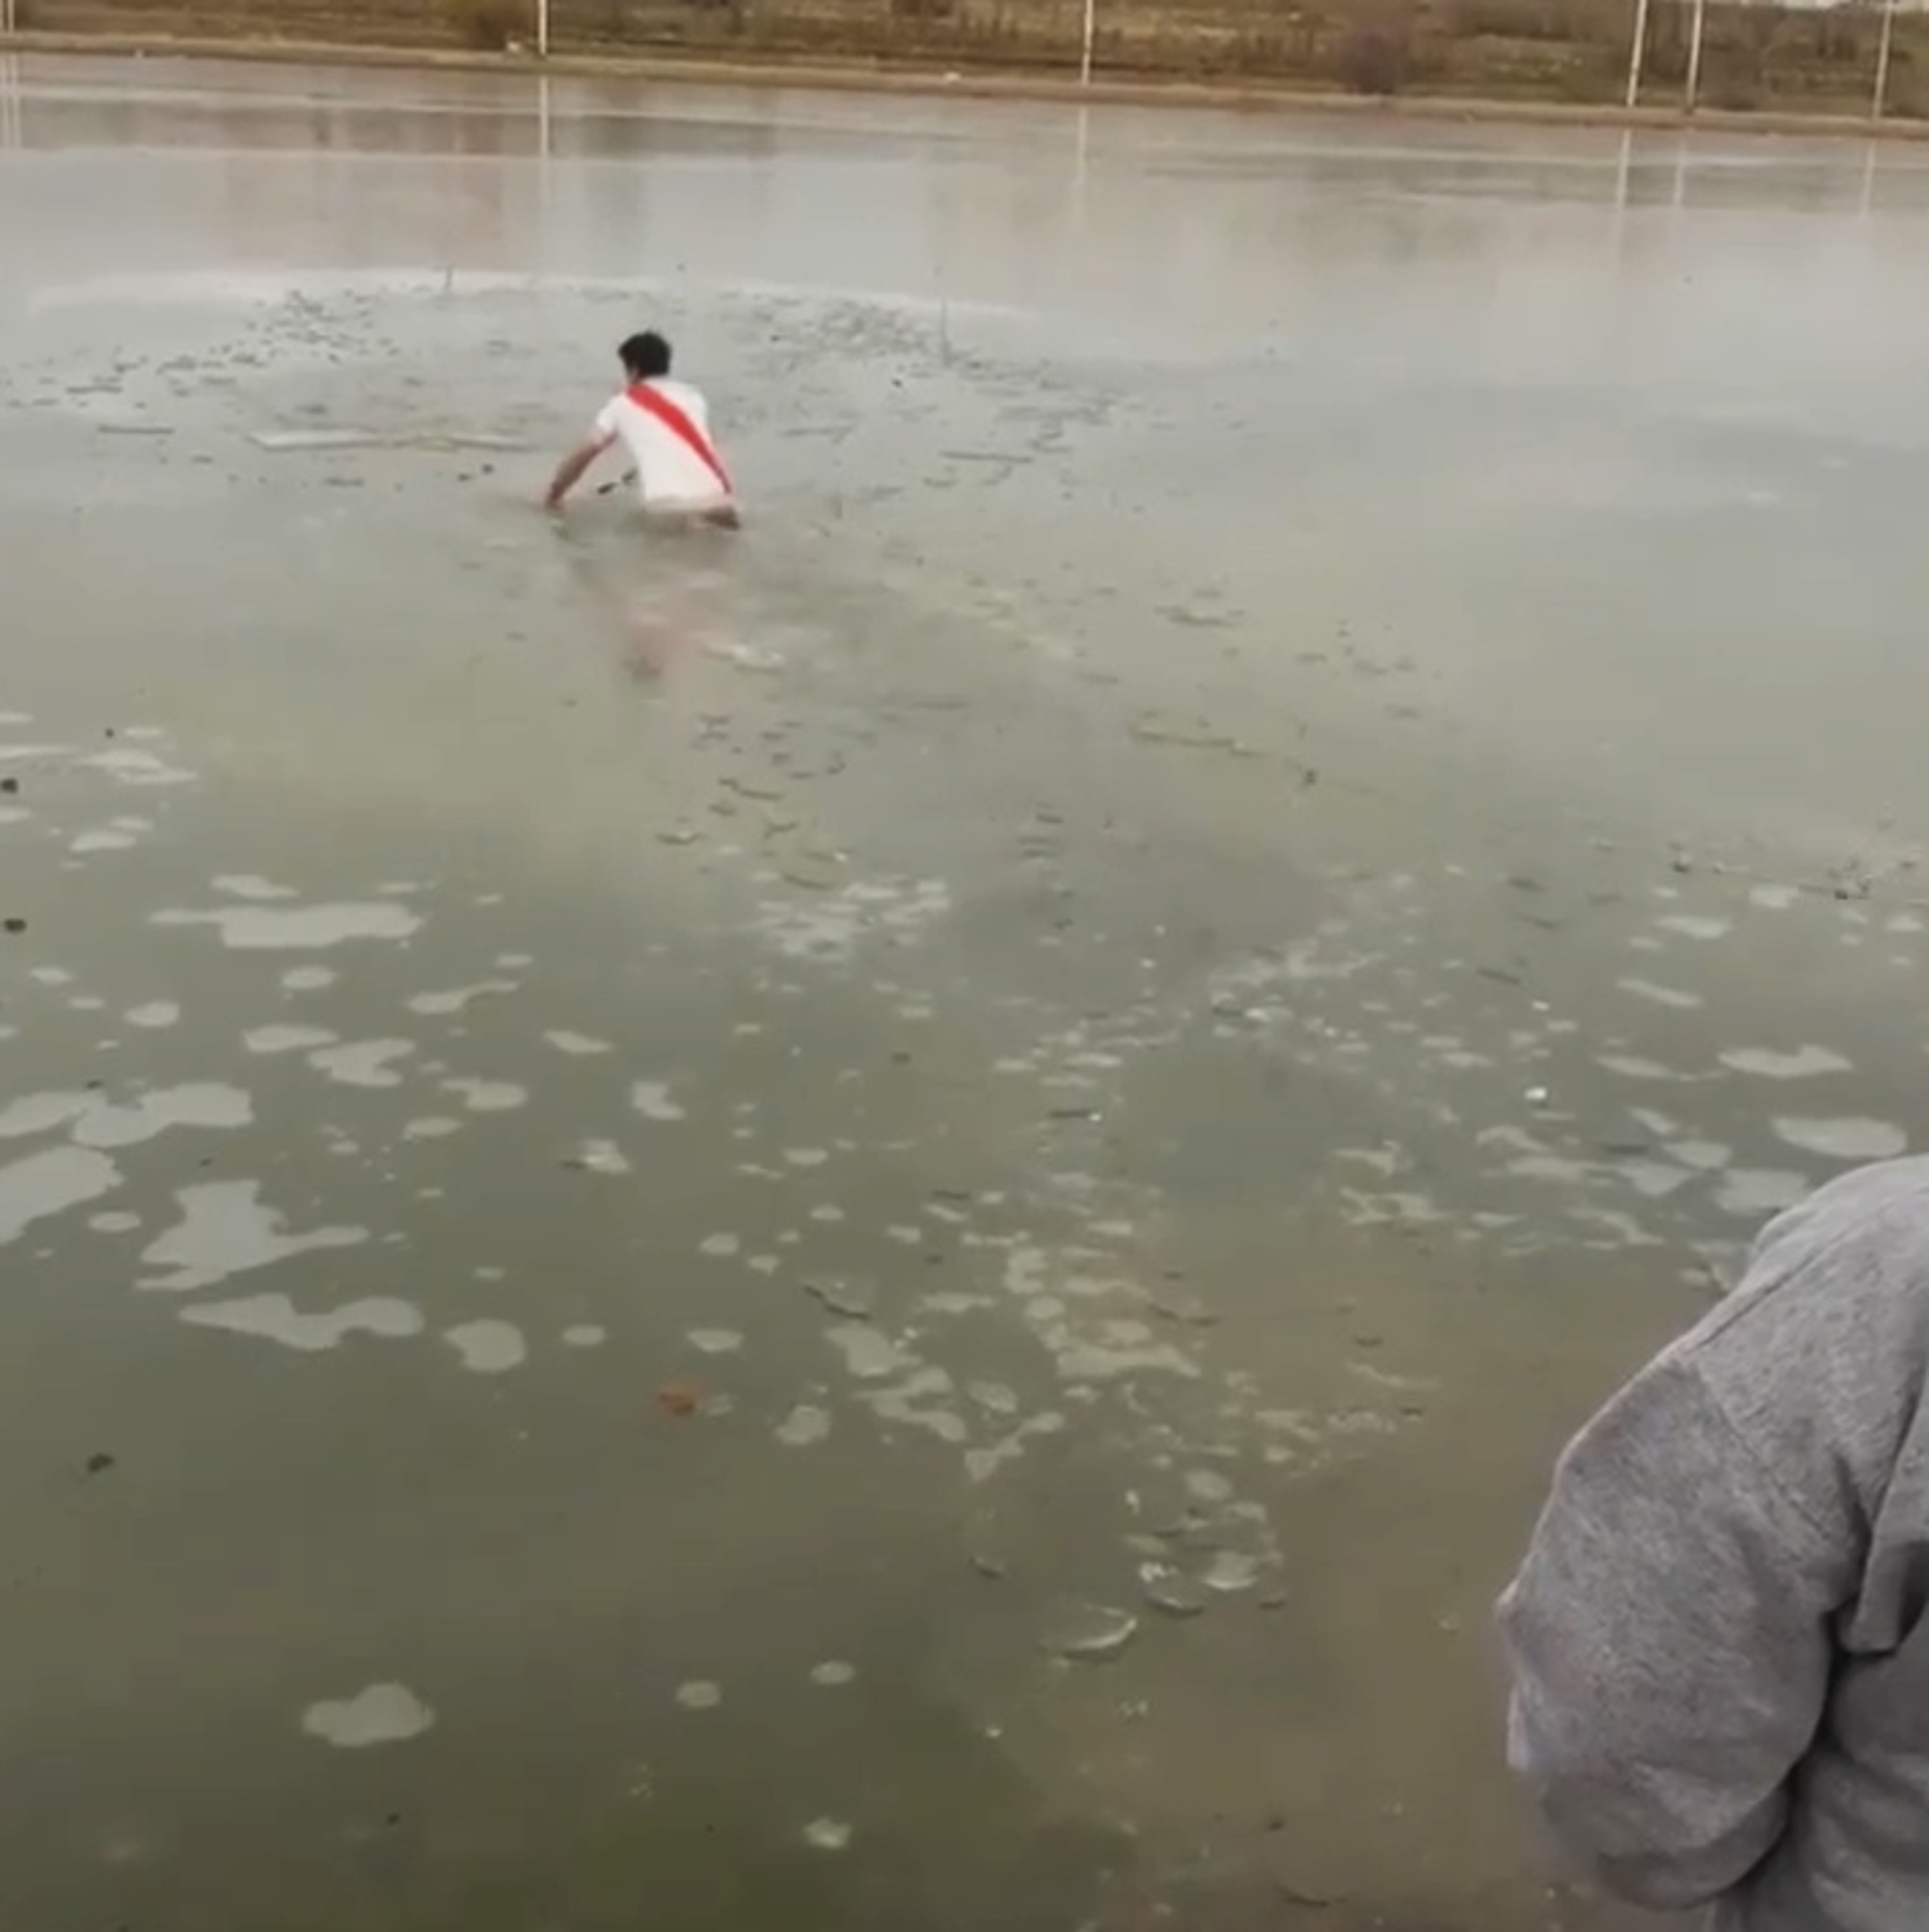 Read more about the article Viral: Man Breaks Ice On Frozen Lake To Rescue Blind Dog